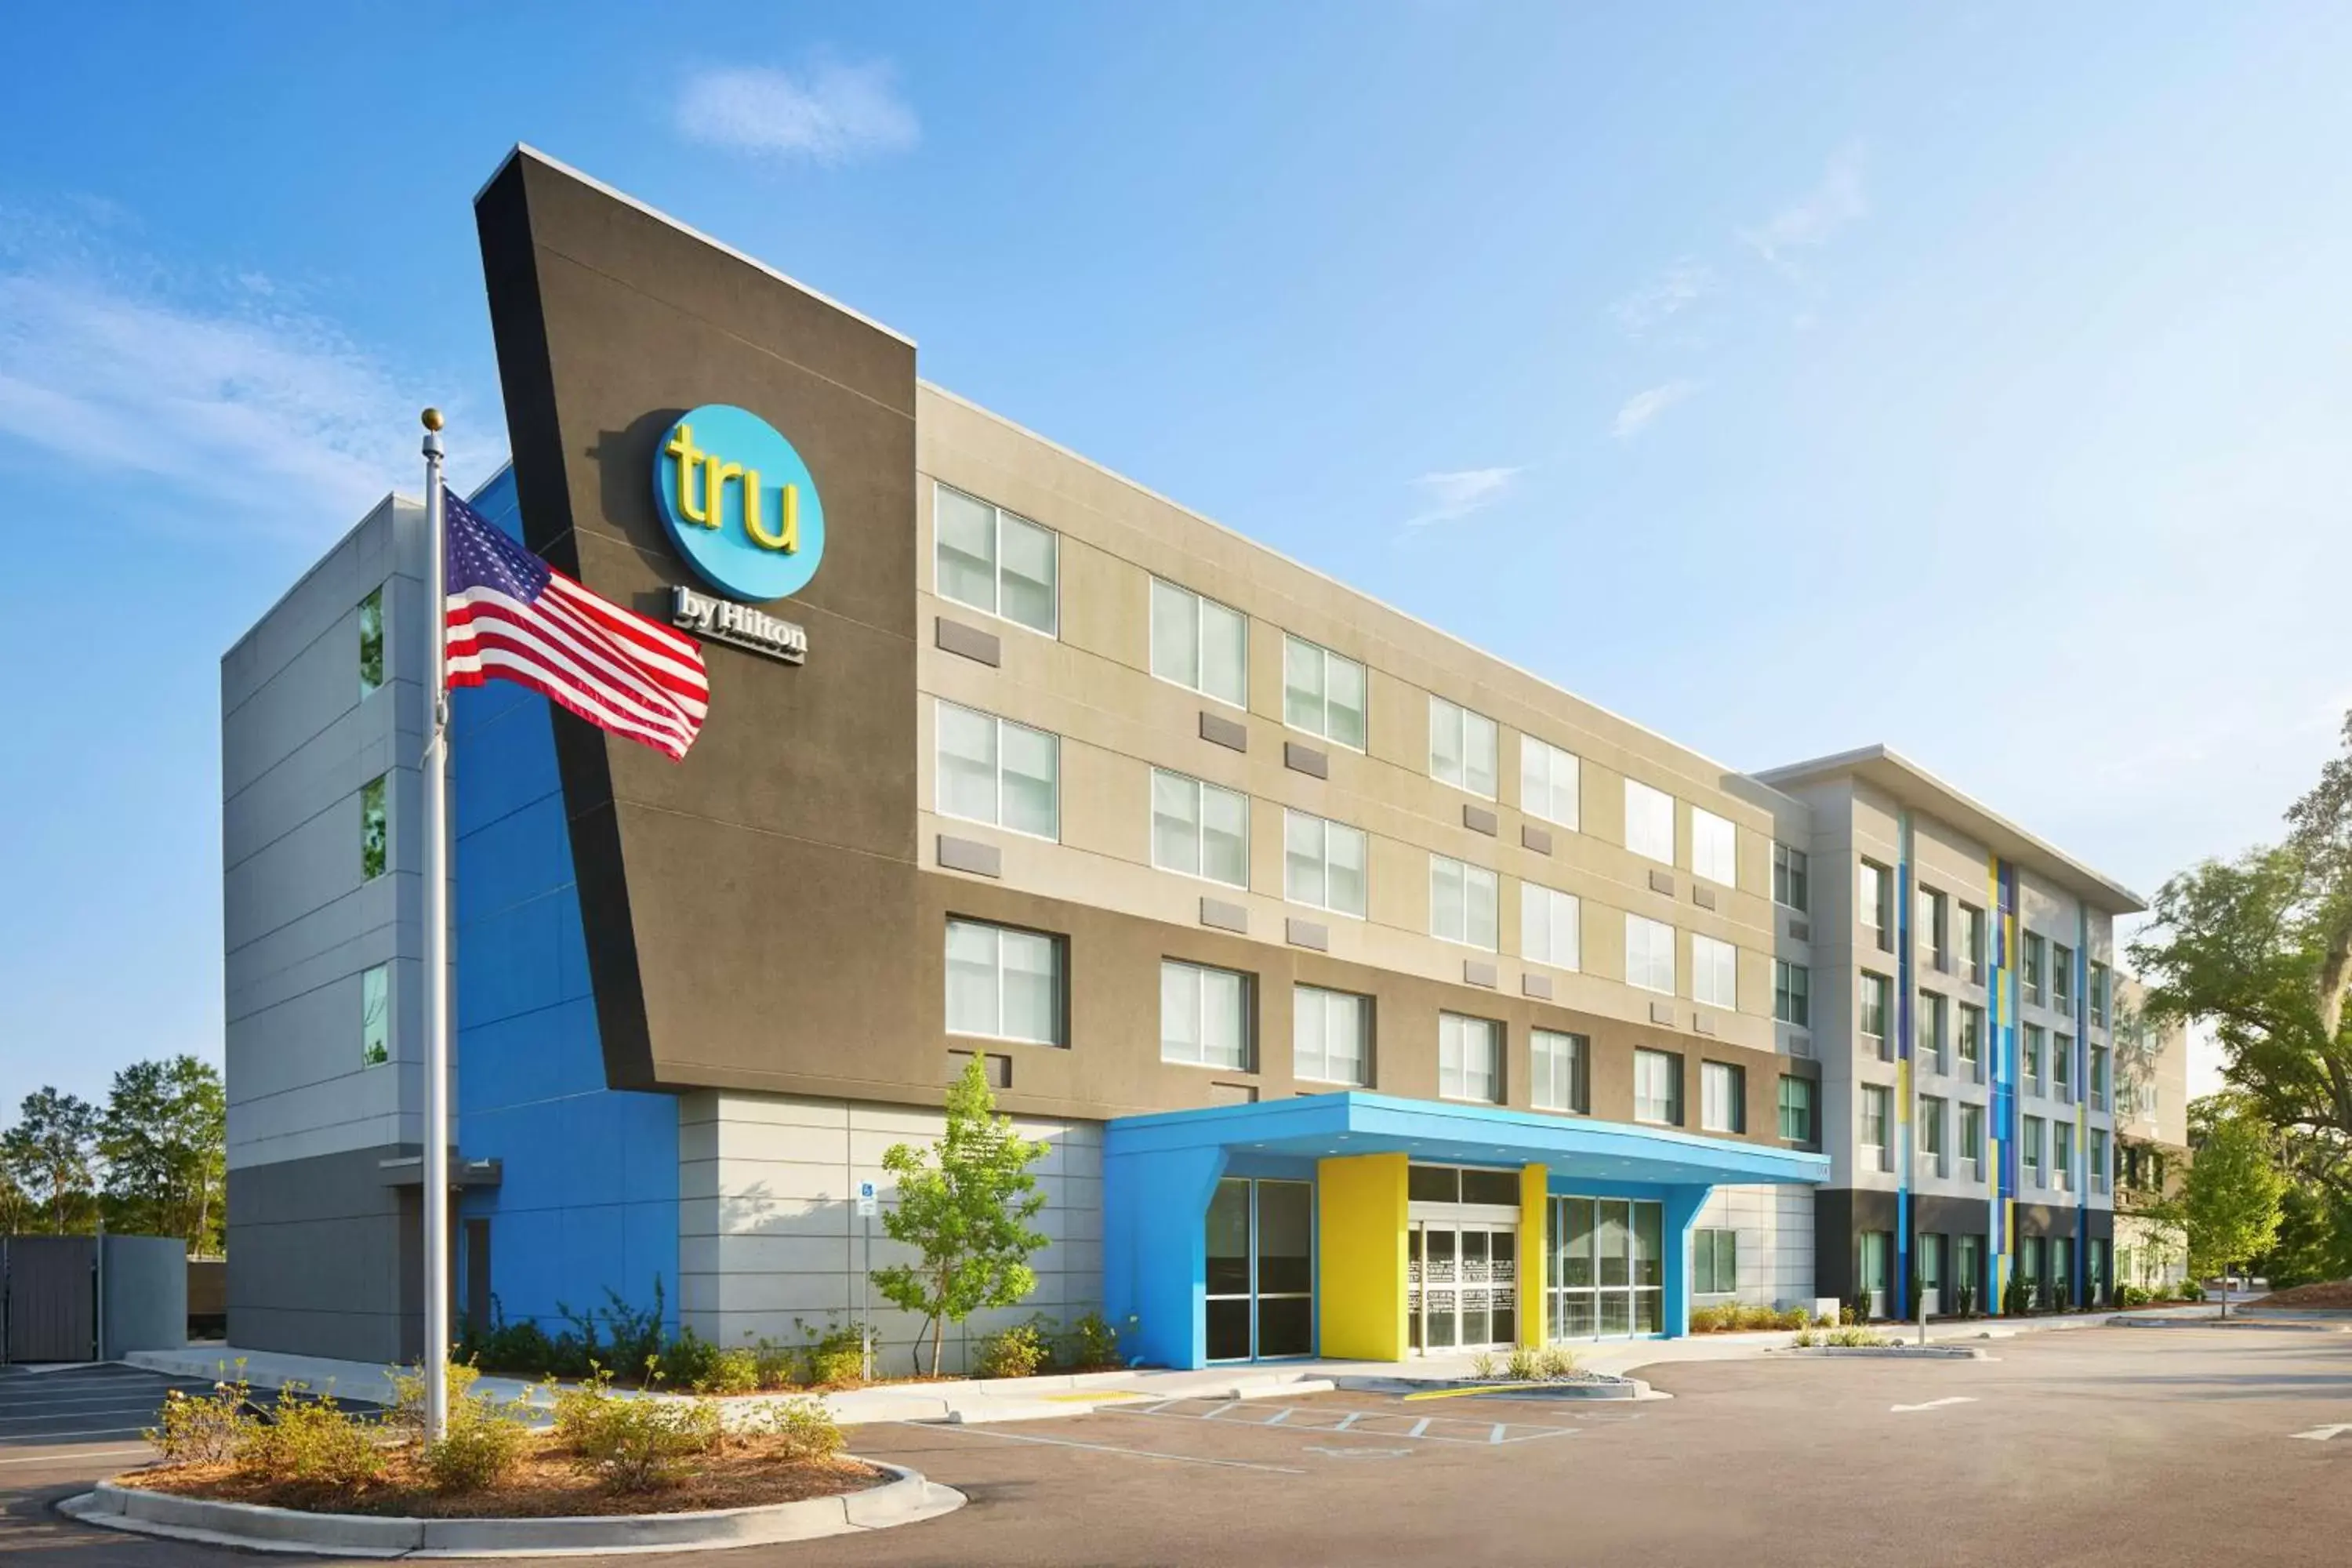 Property Building in Tru By Hilton Charleston Airport, Sc